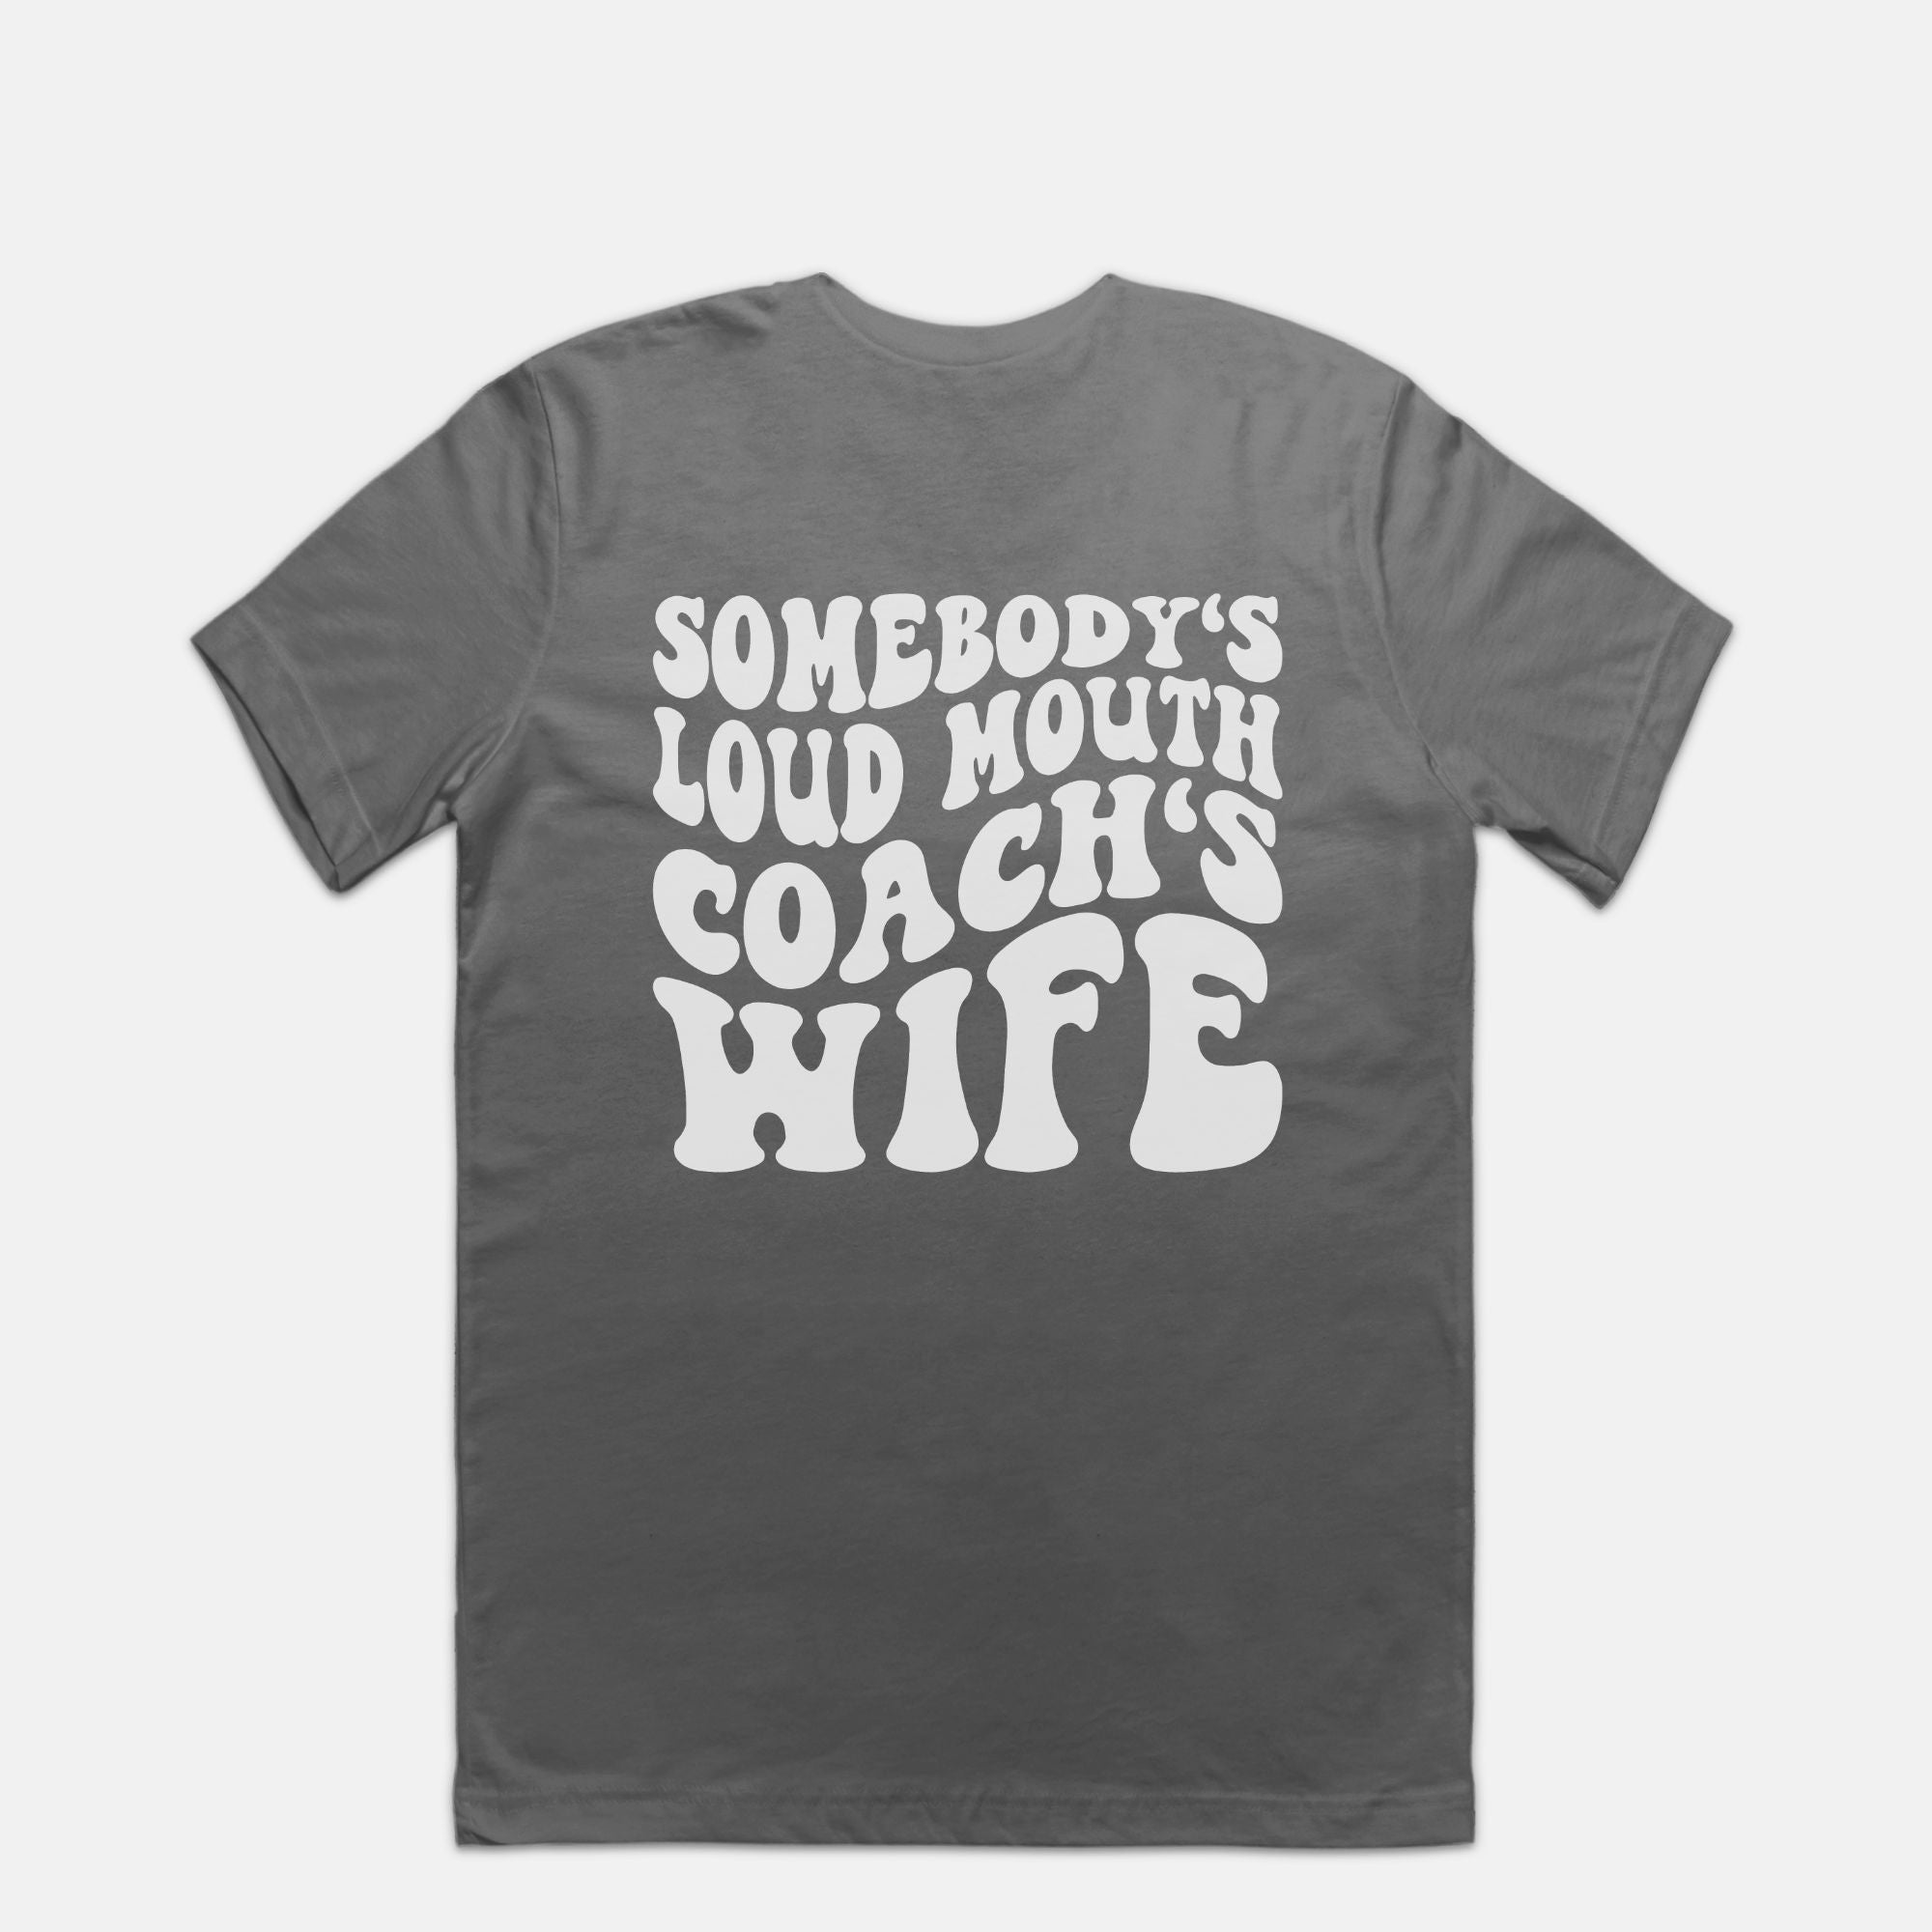 Somebody's Loud Mouth Coach's Wife 2